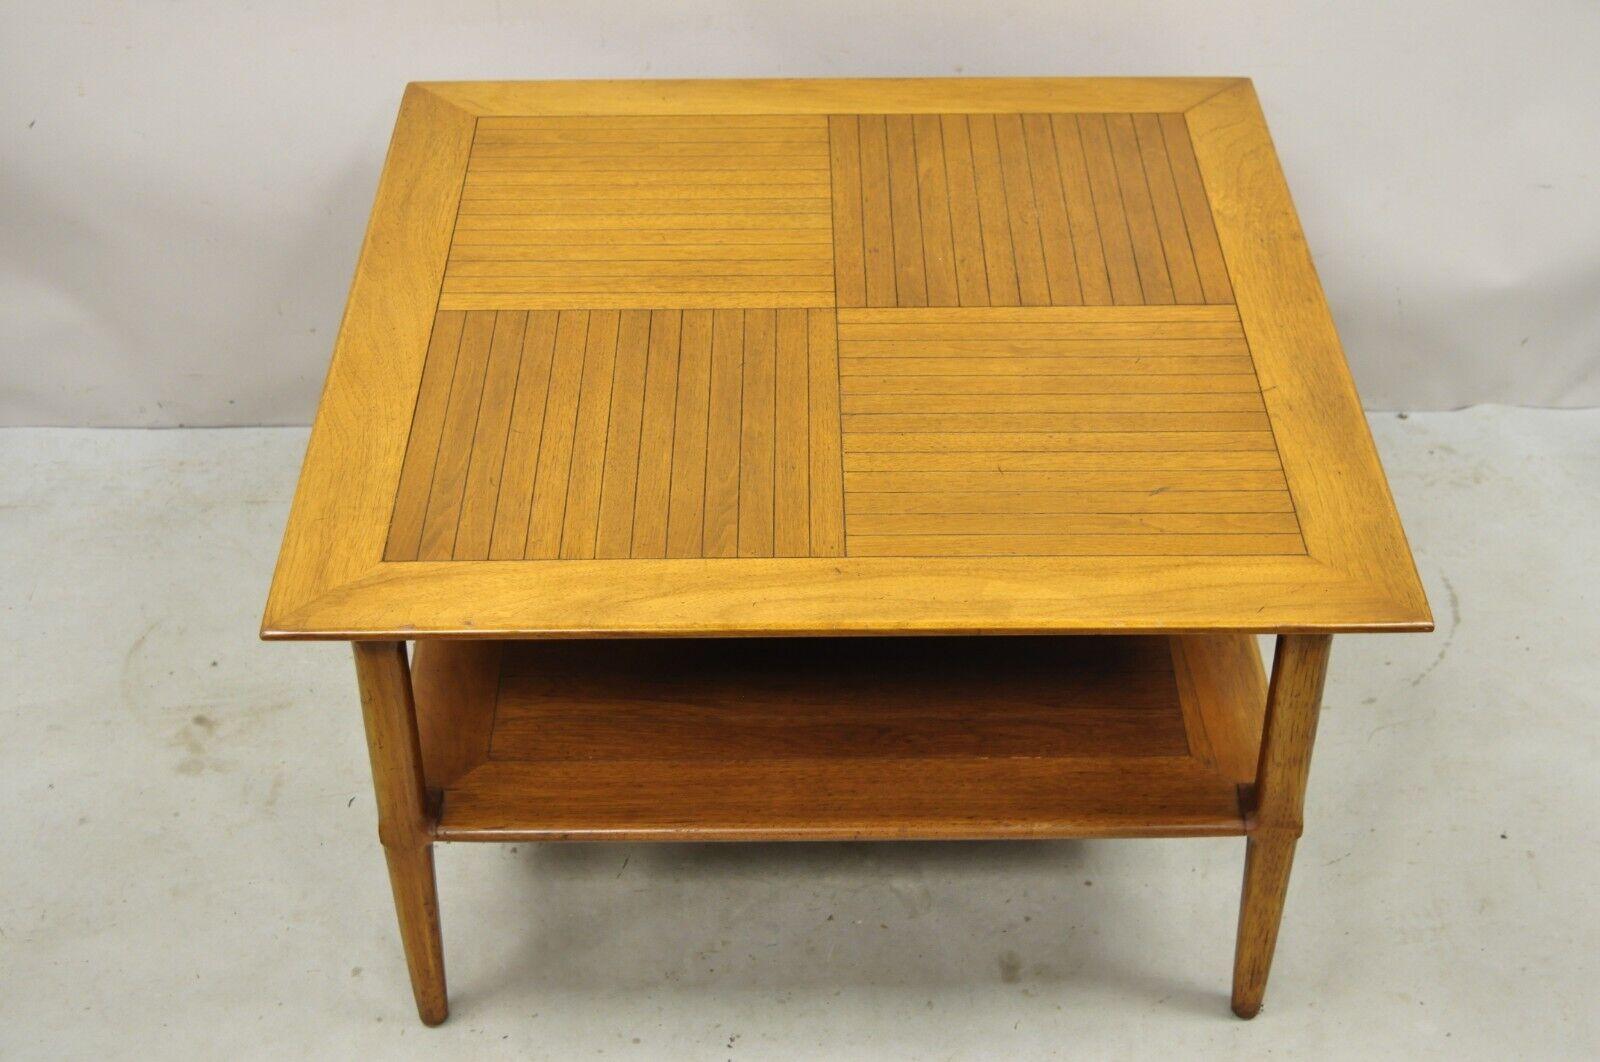 Vintage Tomlinson Sophisticate Square Walnut Mid Century Modern Lamp Side Table. Circa Mid 20th Century. Dimensions : 19